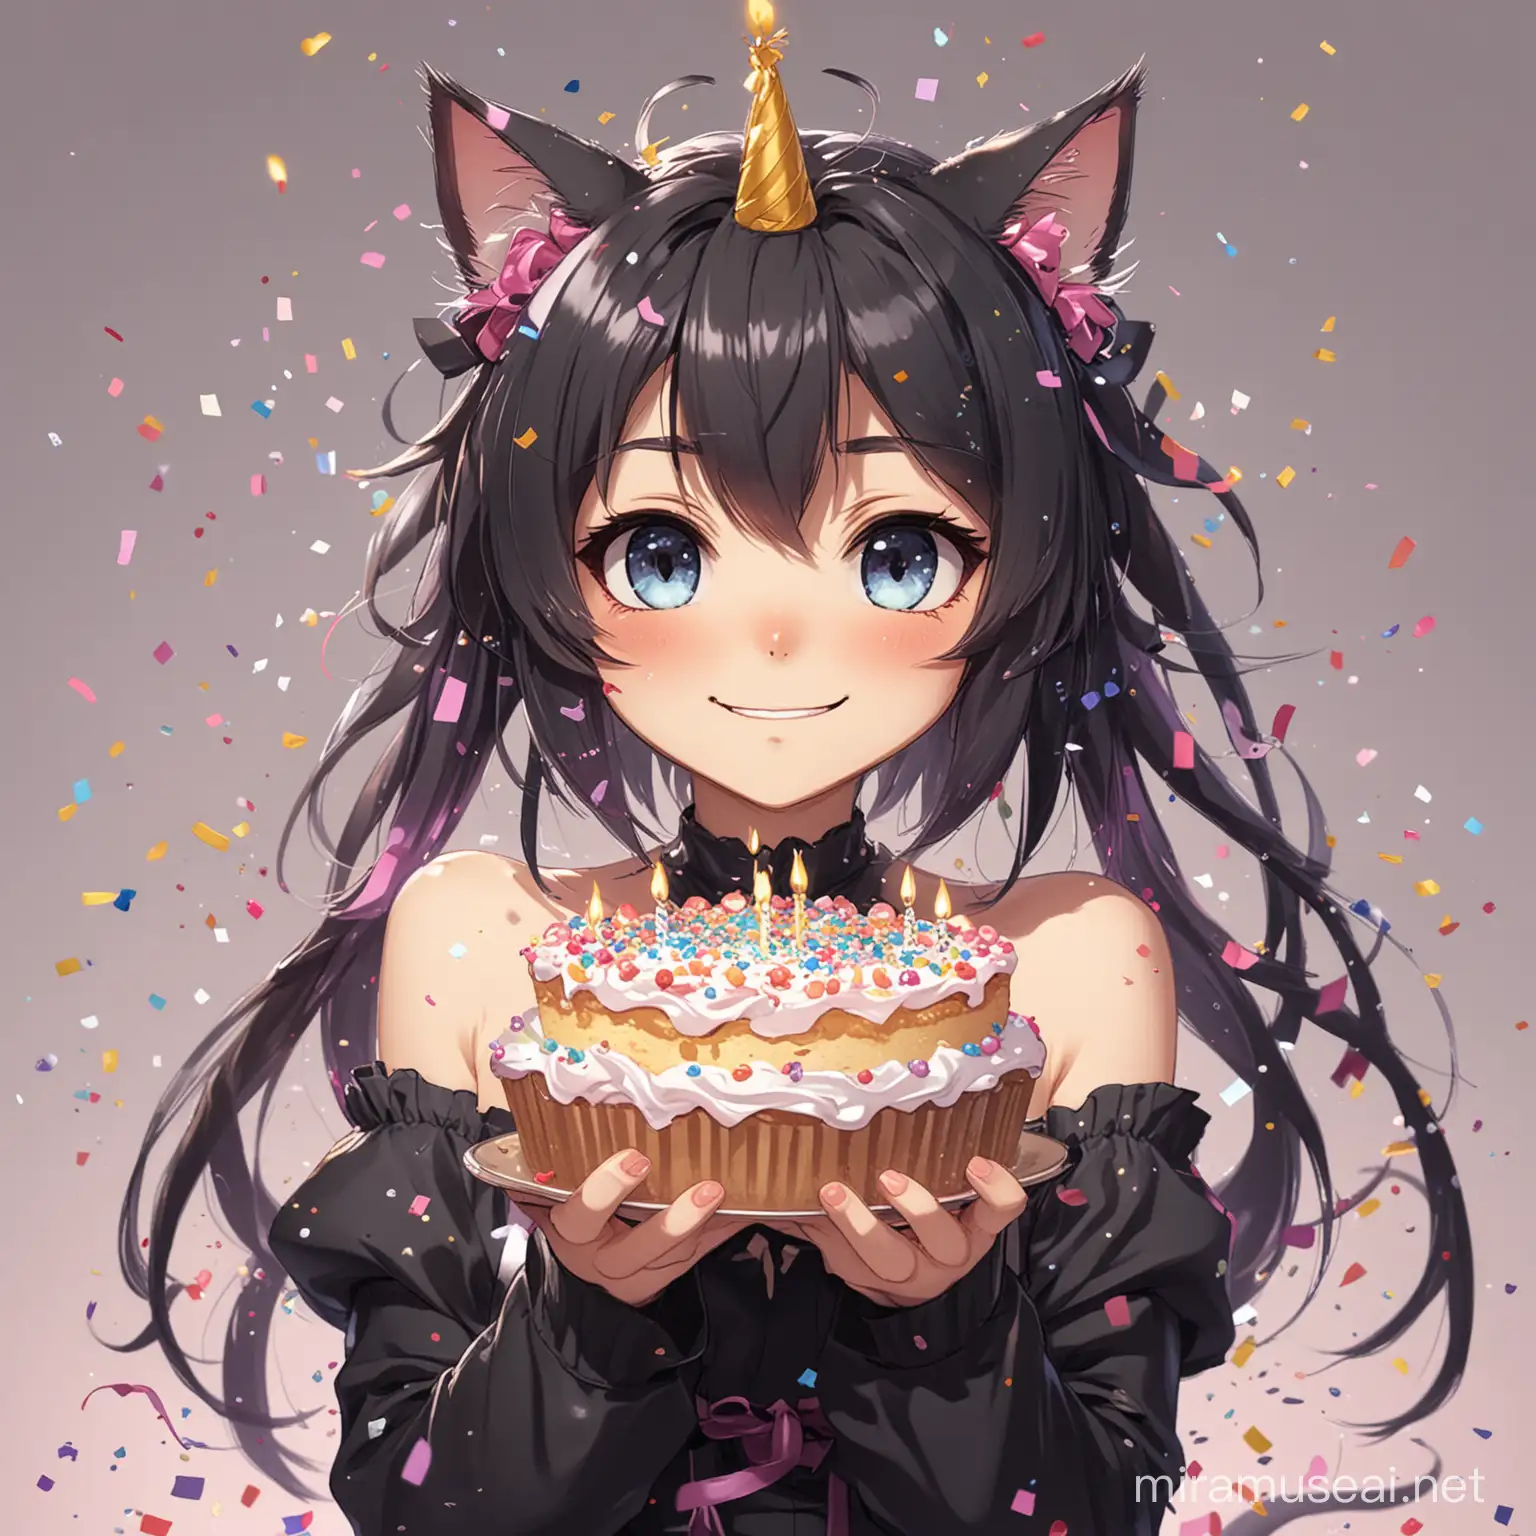 Anime Birthday Party with Catgirl in Confetti Shower